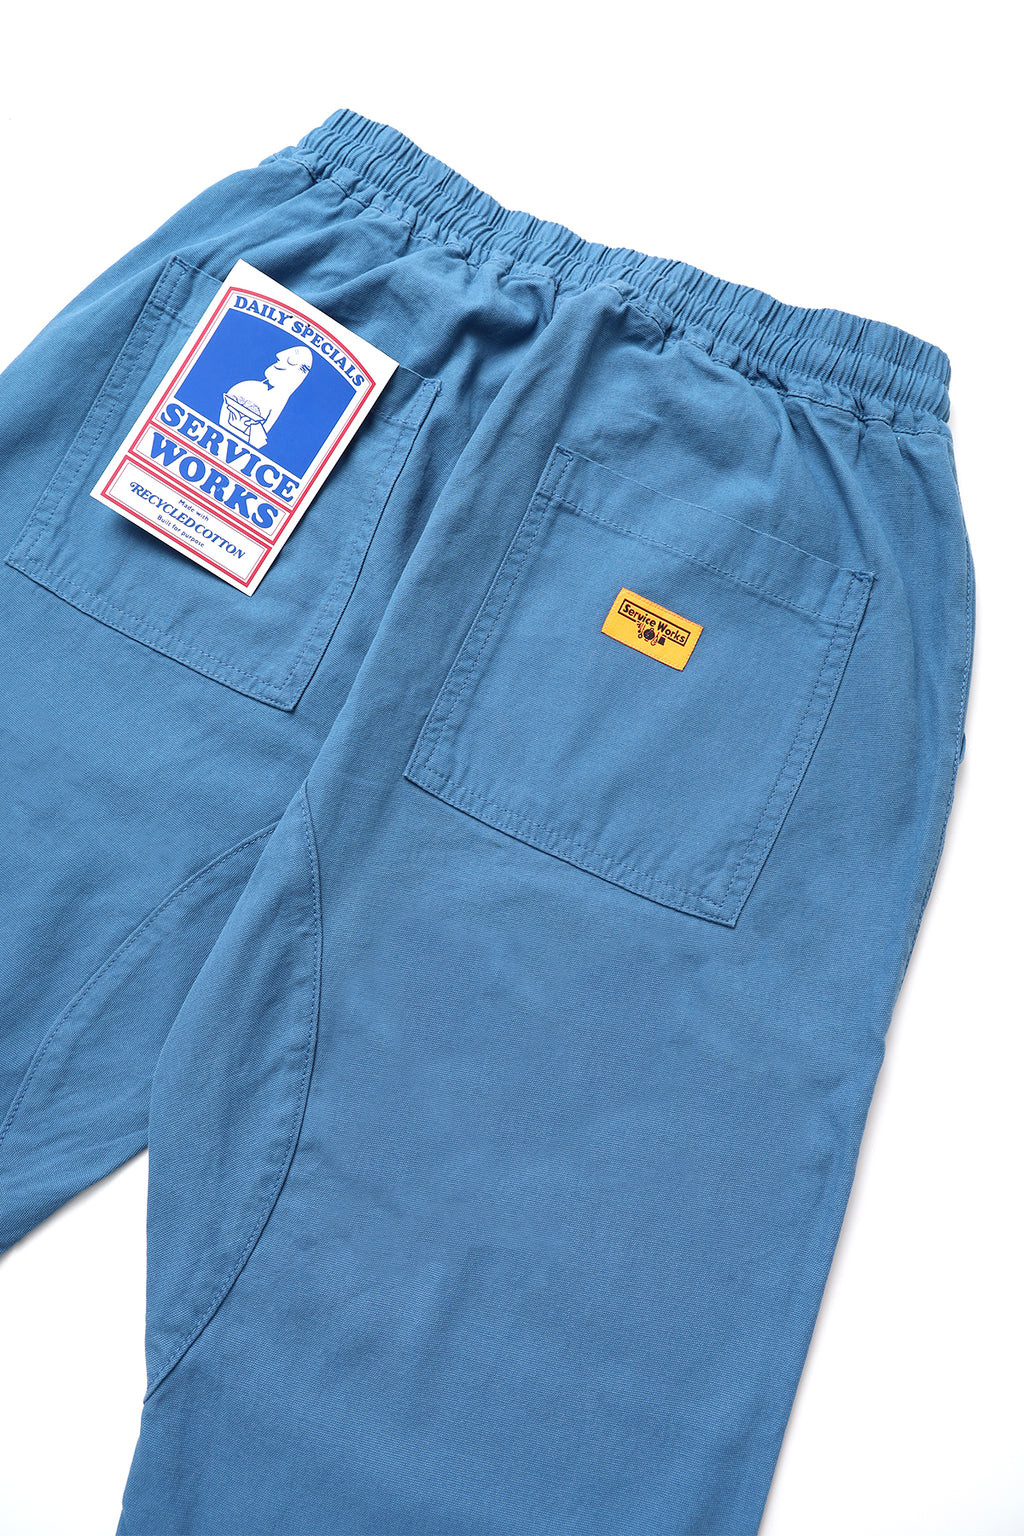 Service Works - Trade Chef Pants - Work Blue